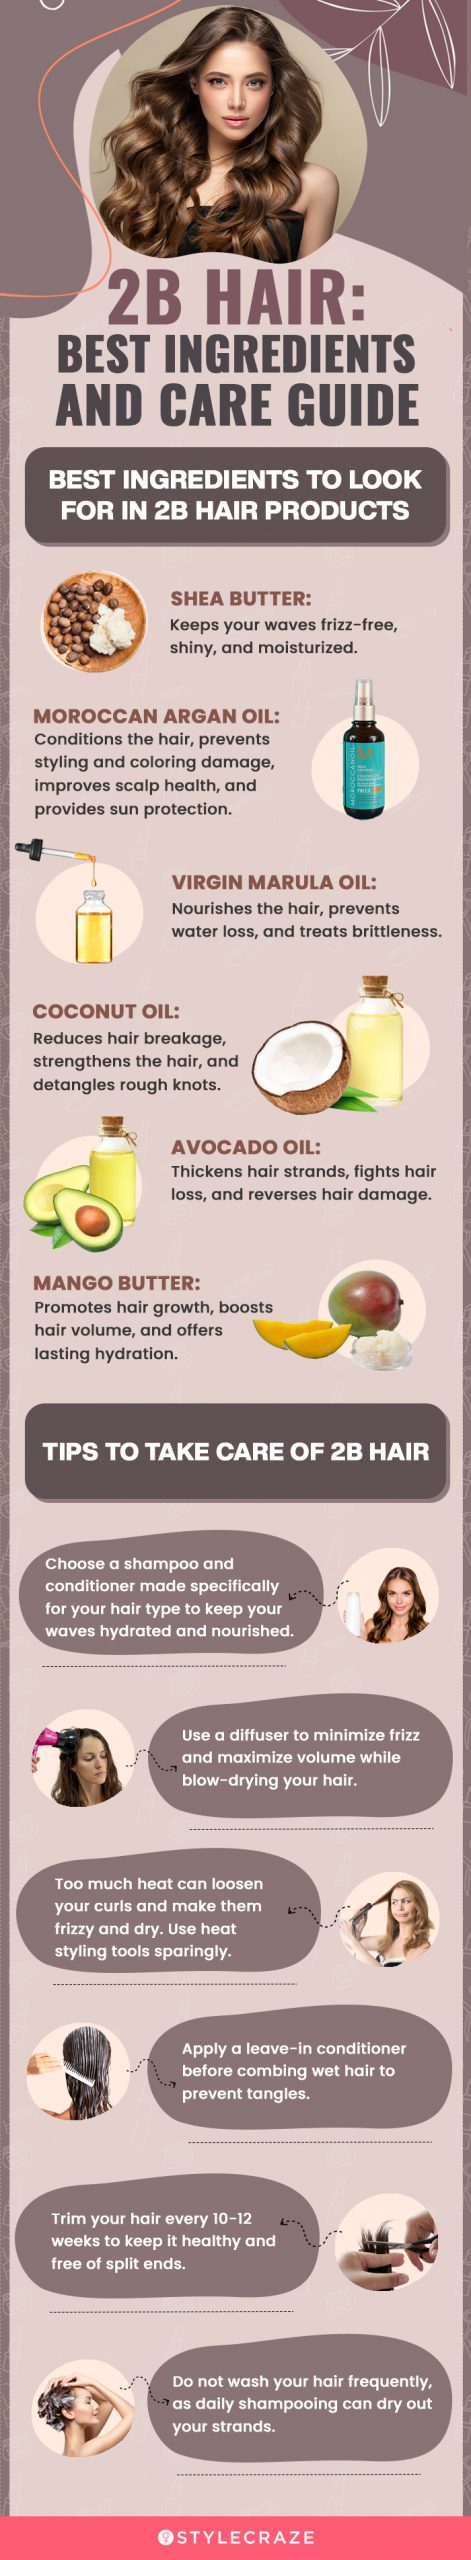 2B Hair: Best Ingredients And Care Guide [infographic]